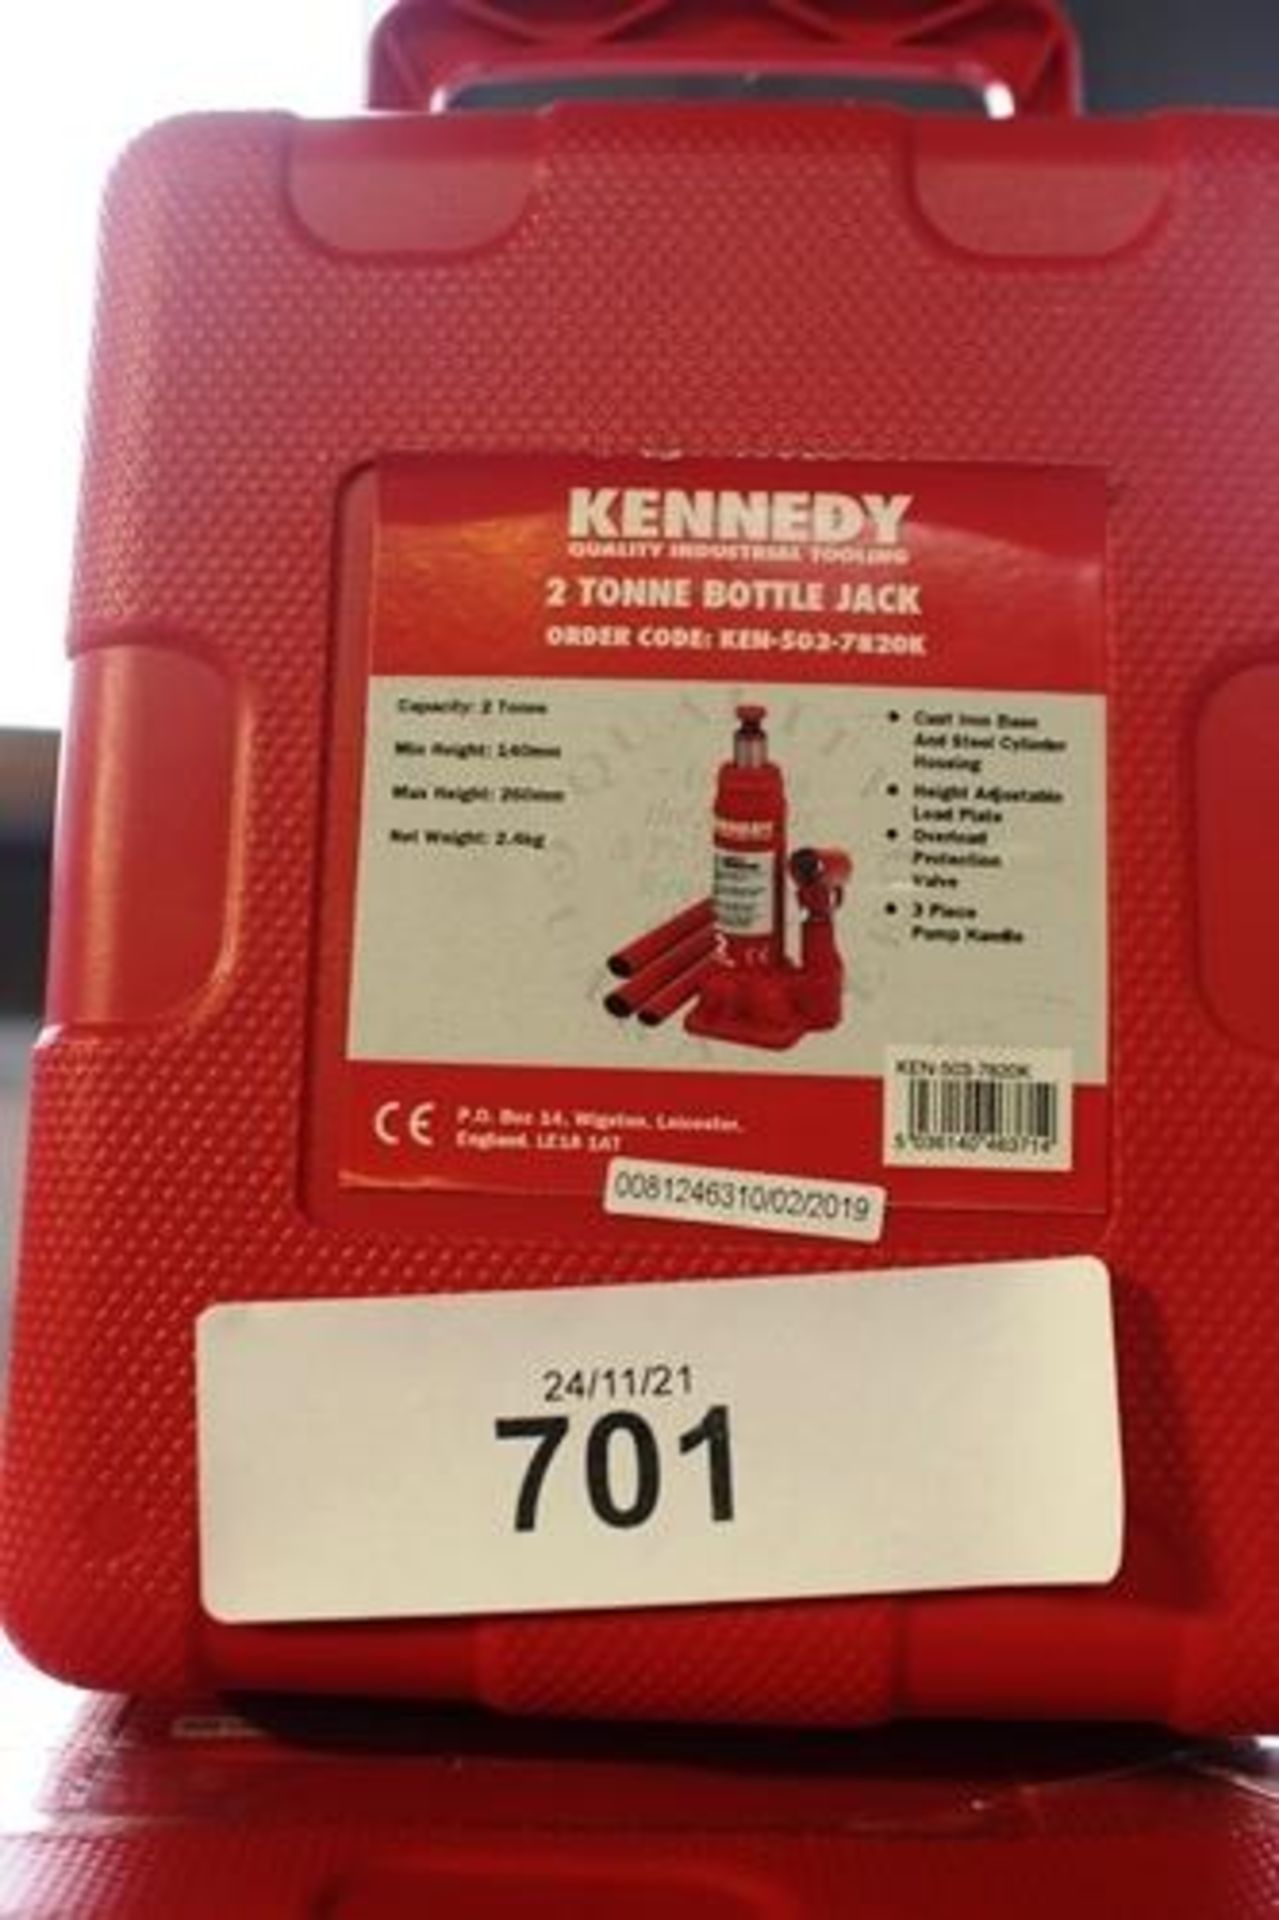 1 x Kennedy dent puller set, 1 x Kennedy 5T and 1 x 2T bottles jacks and 1 x ALB 30558 vacuum